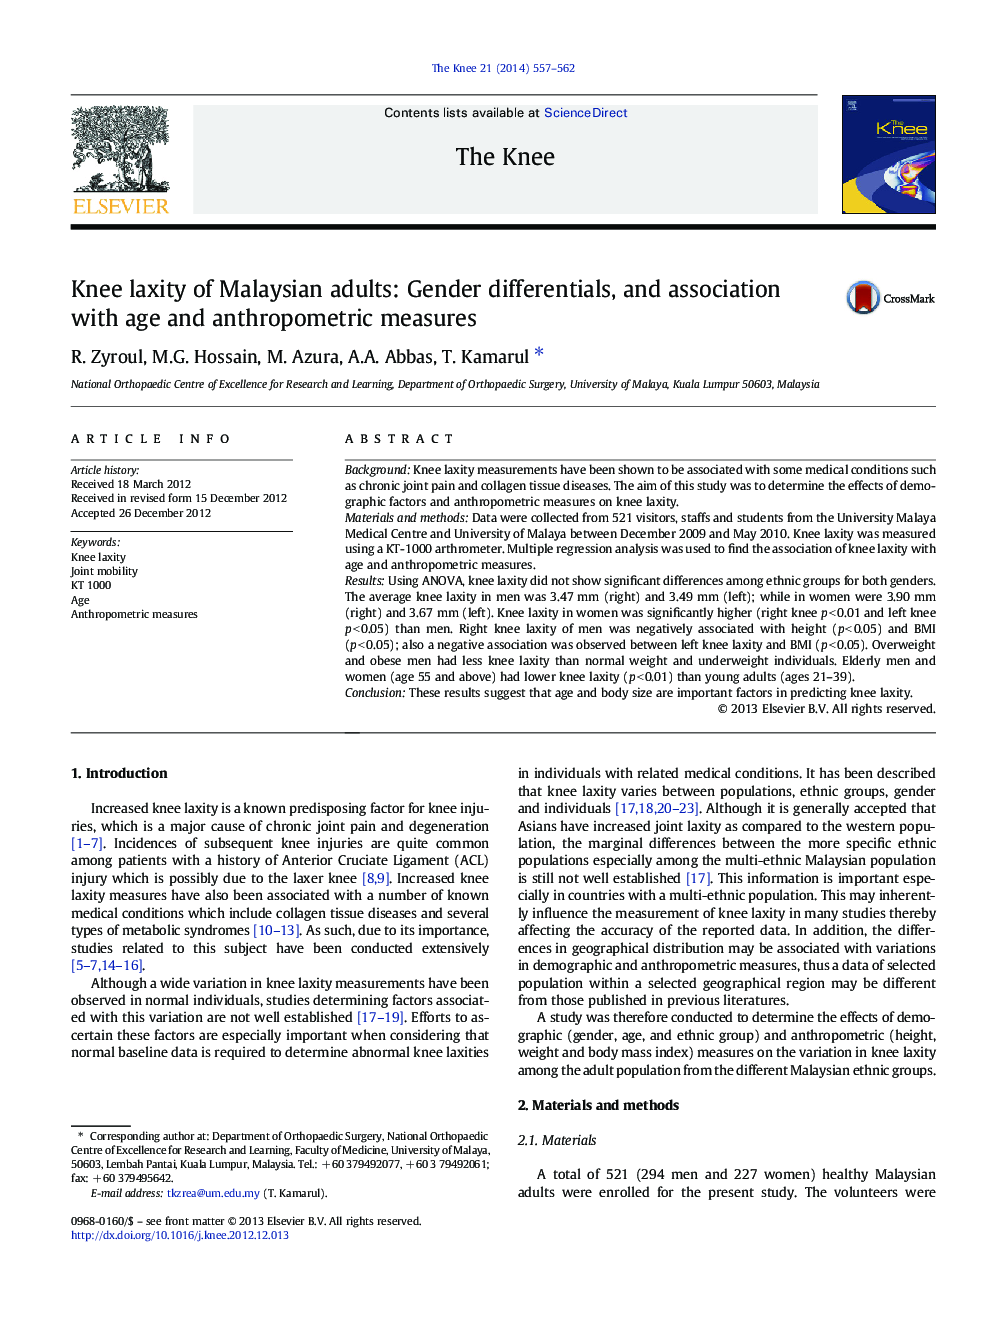 Knee laxity of Malaysian adults: Gender differentials, and association with age and anthropometric measures